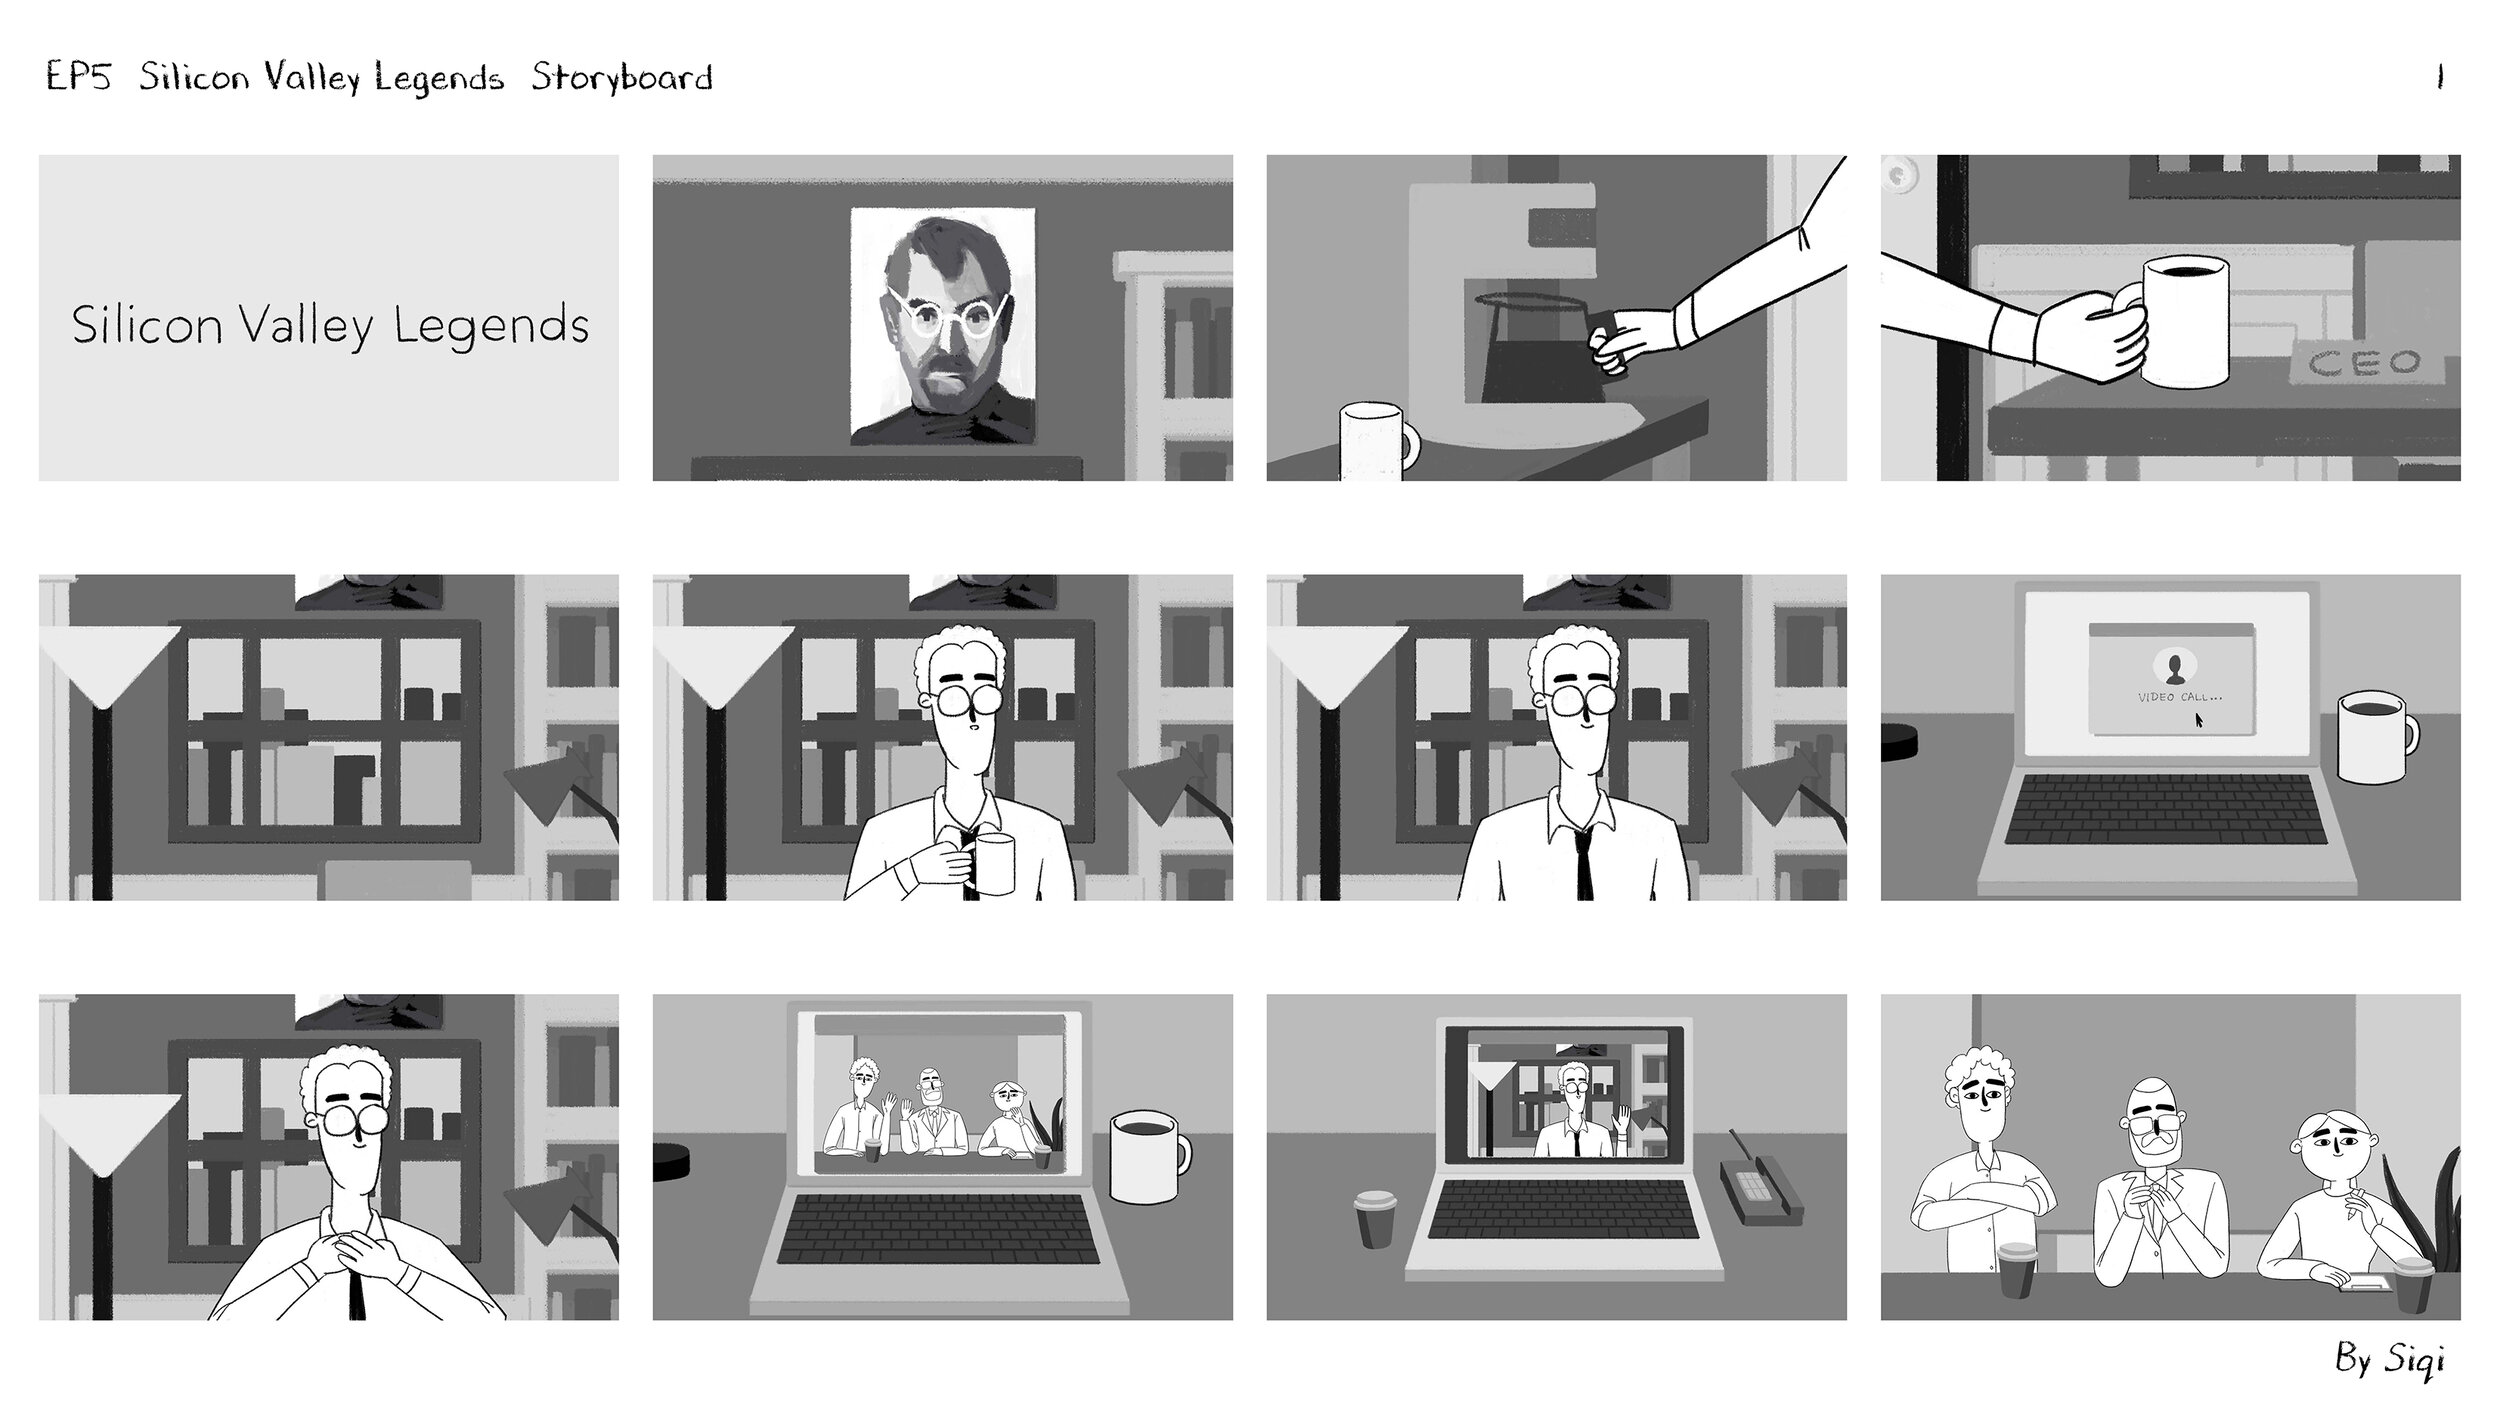 EP5_Silicon Valley Legends_Storyboard_Page_1.jpg